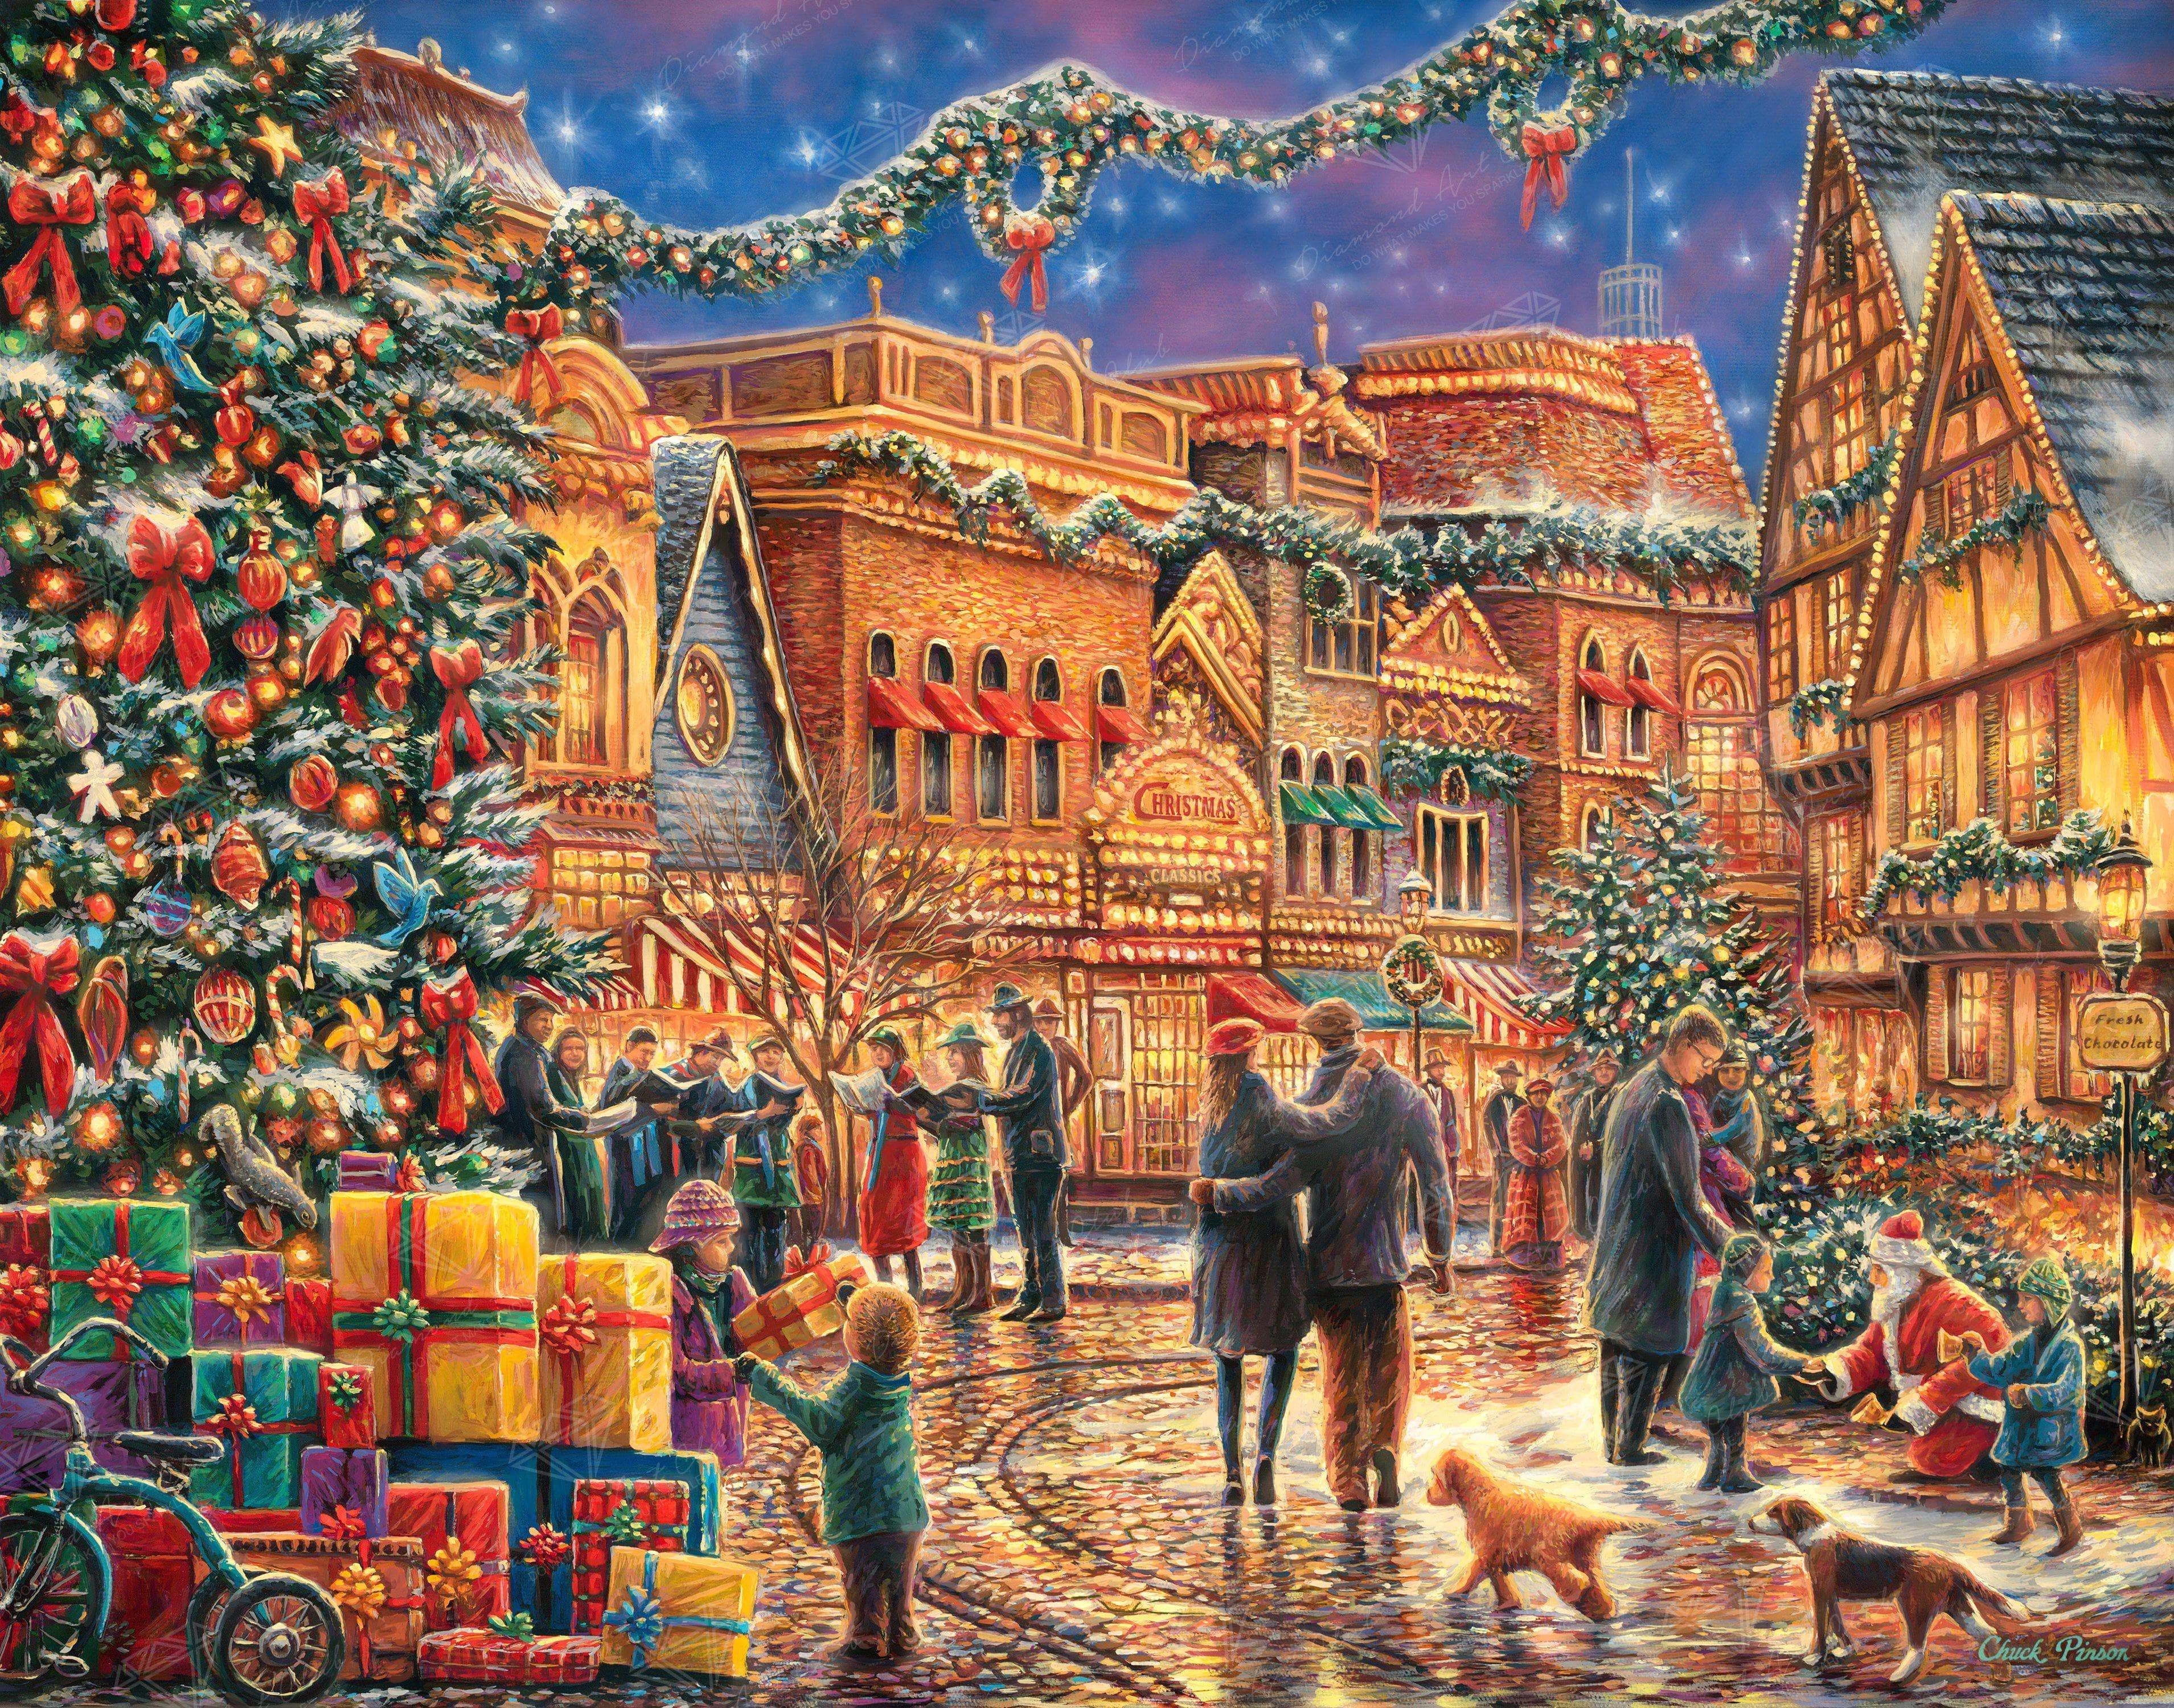 Our most popular canvas, the Christmas Village Stable, is in stock